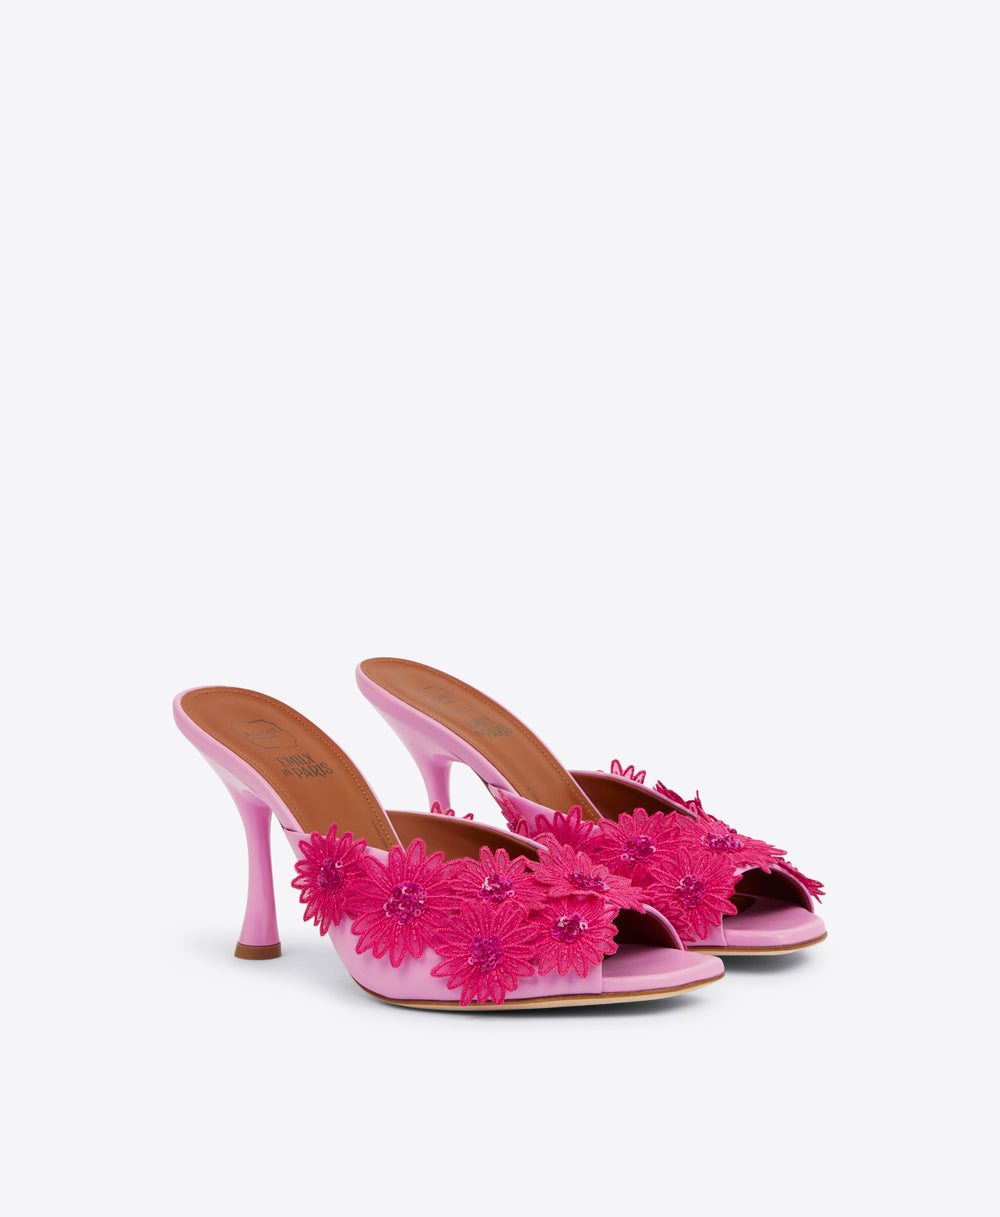 Women's Pink Leather Embellished Sandal Mules Malone Souliers